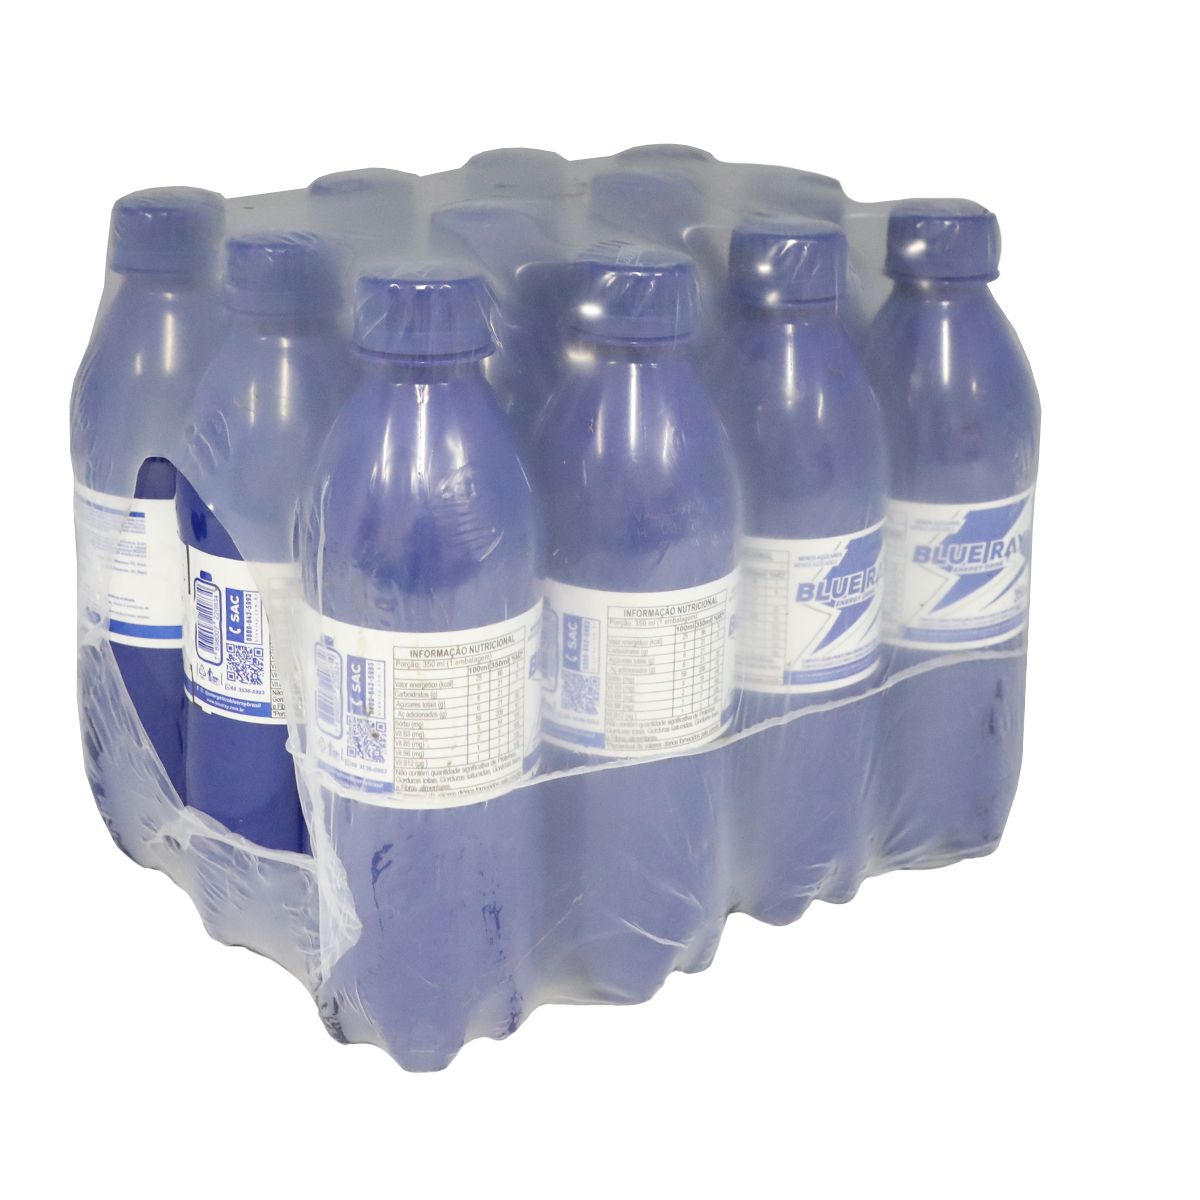 Energético Blue Ray Drink 350ml (Pack com 12 und) image number 0